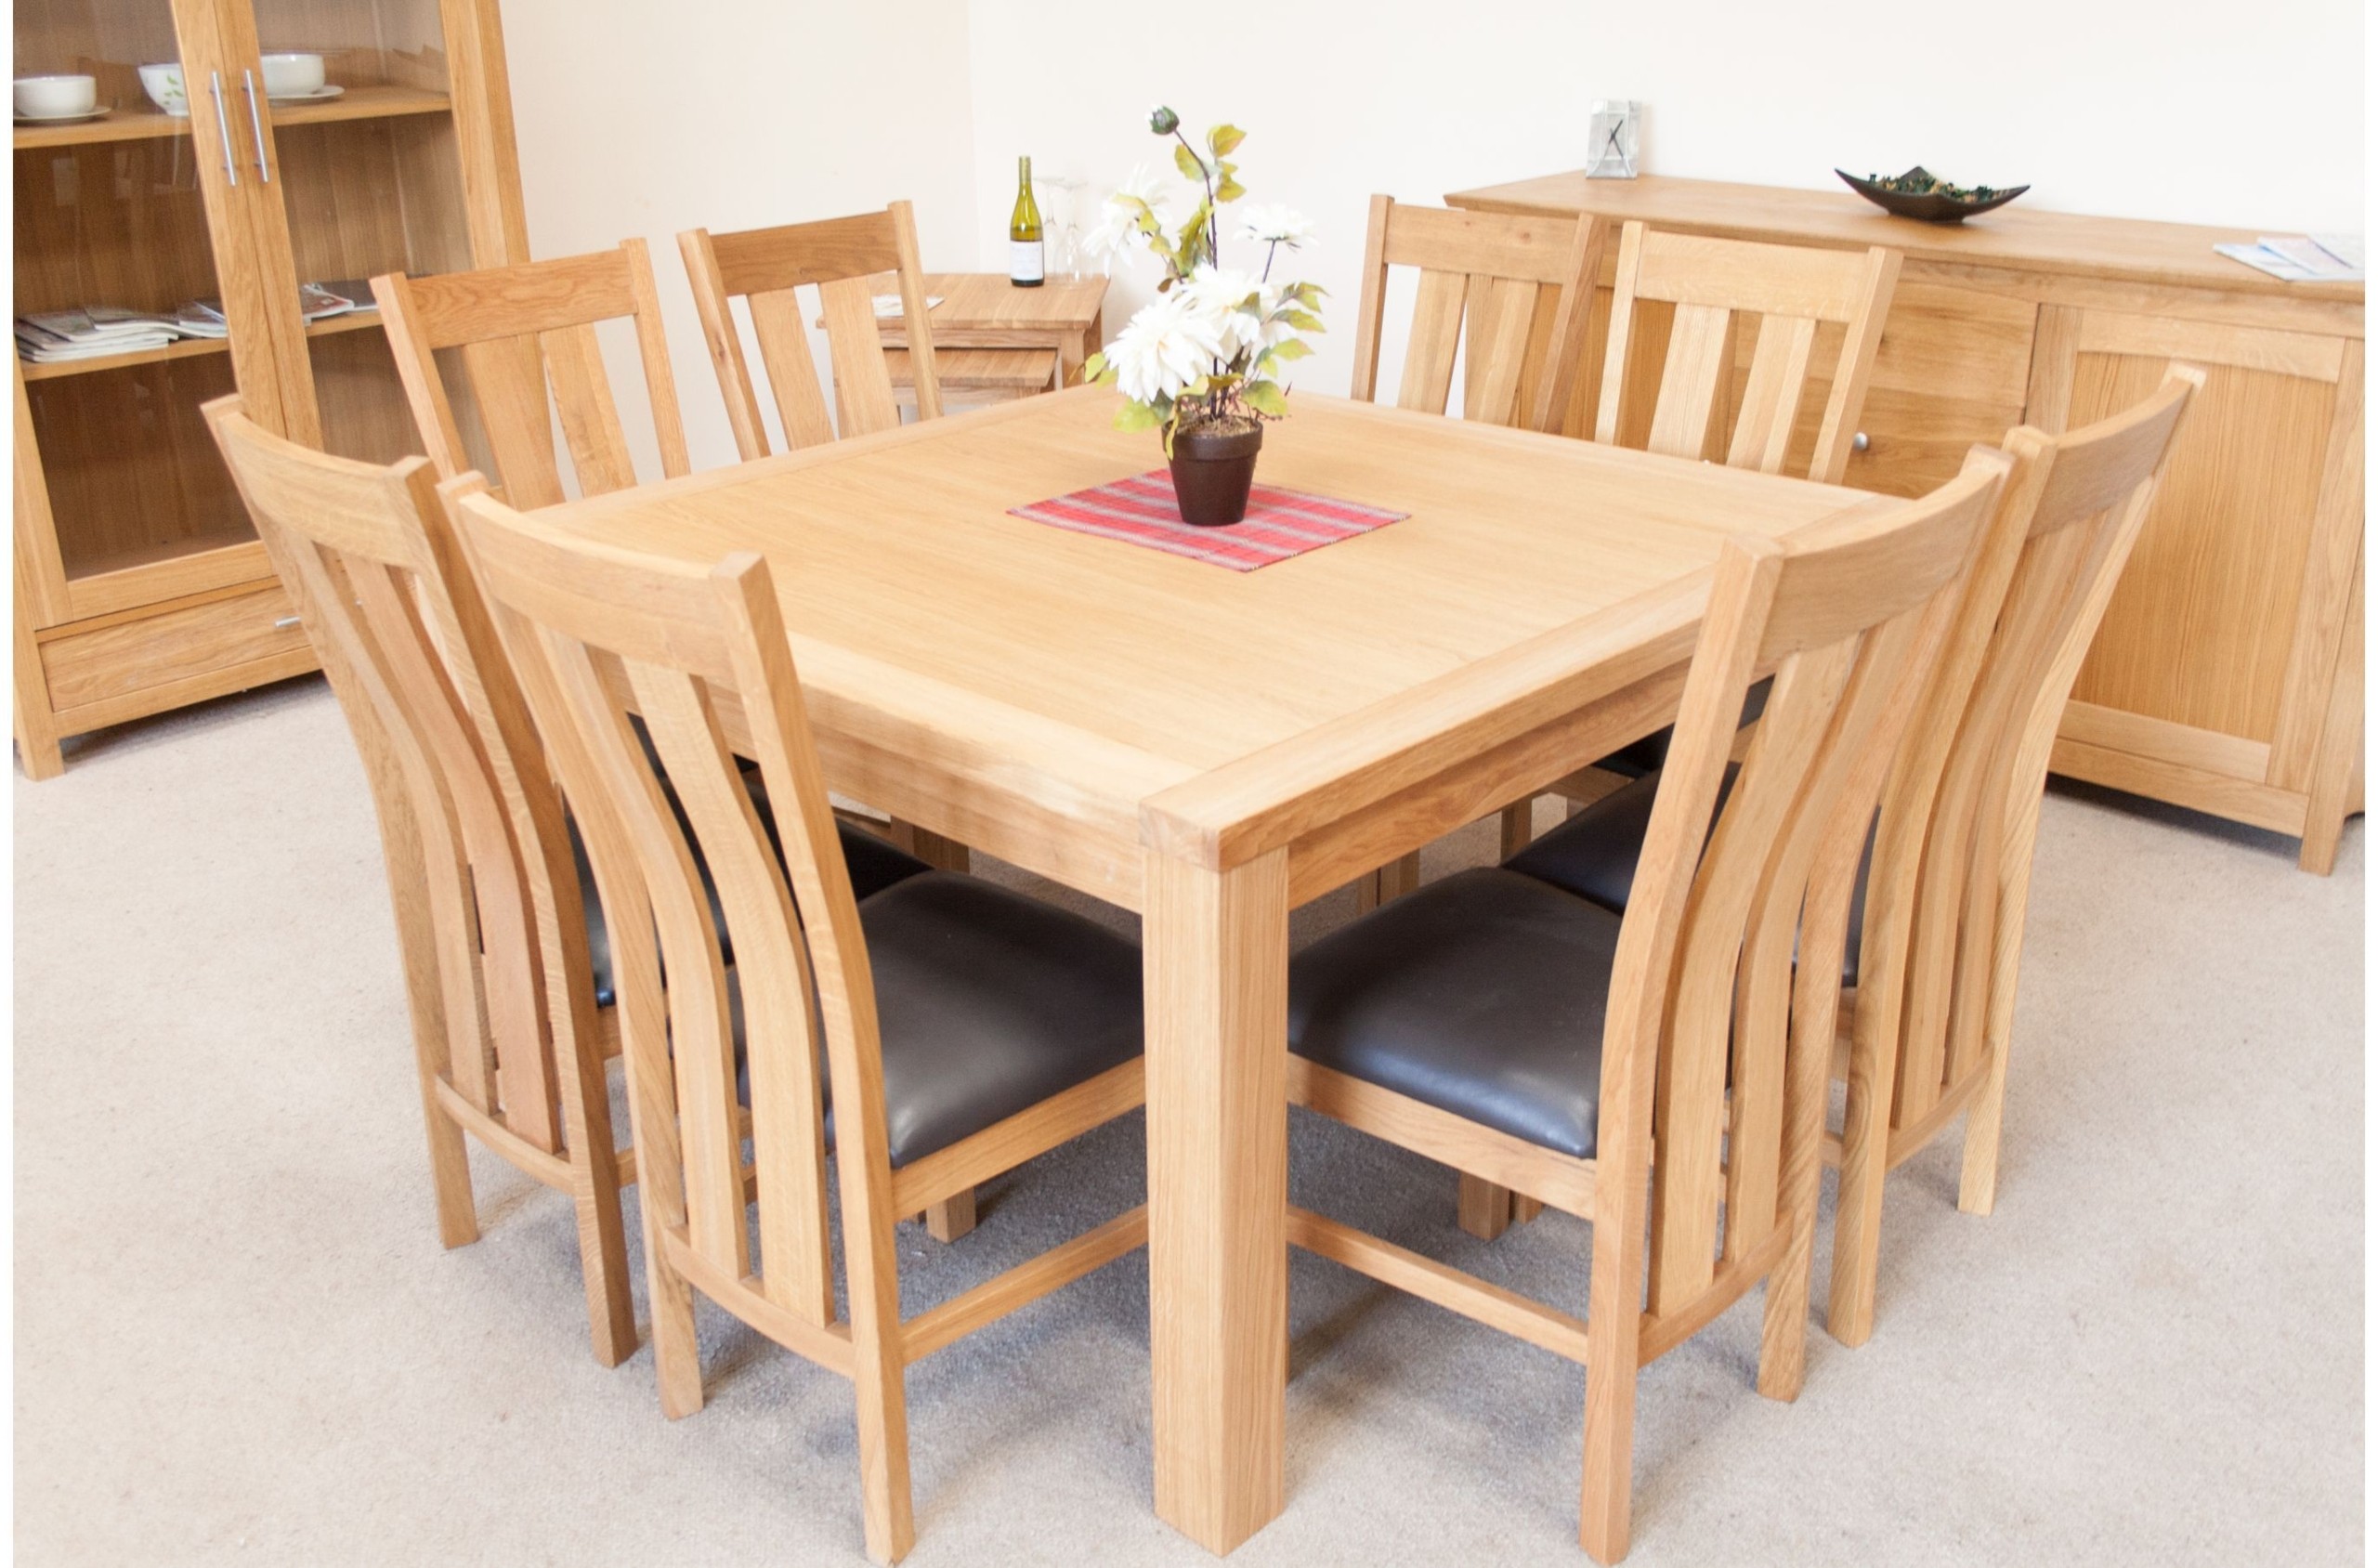 Square Dining Room Table Seats 8 - Ideas on Foter